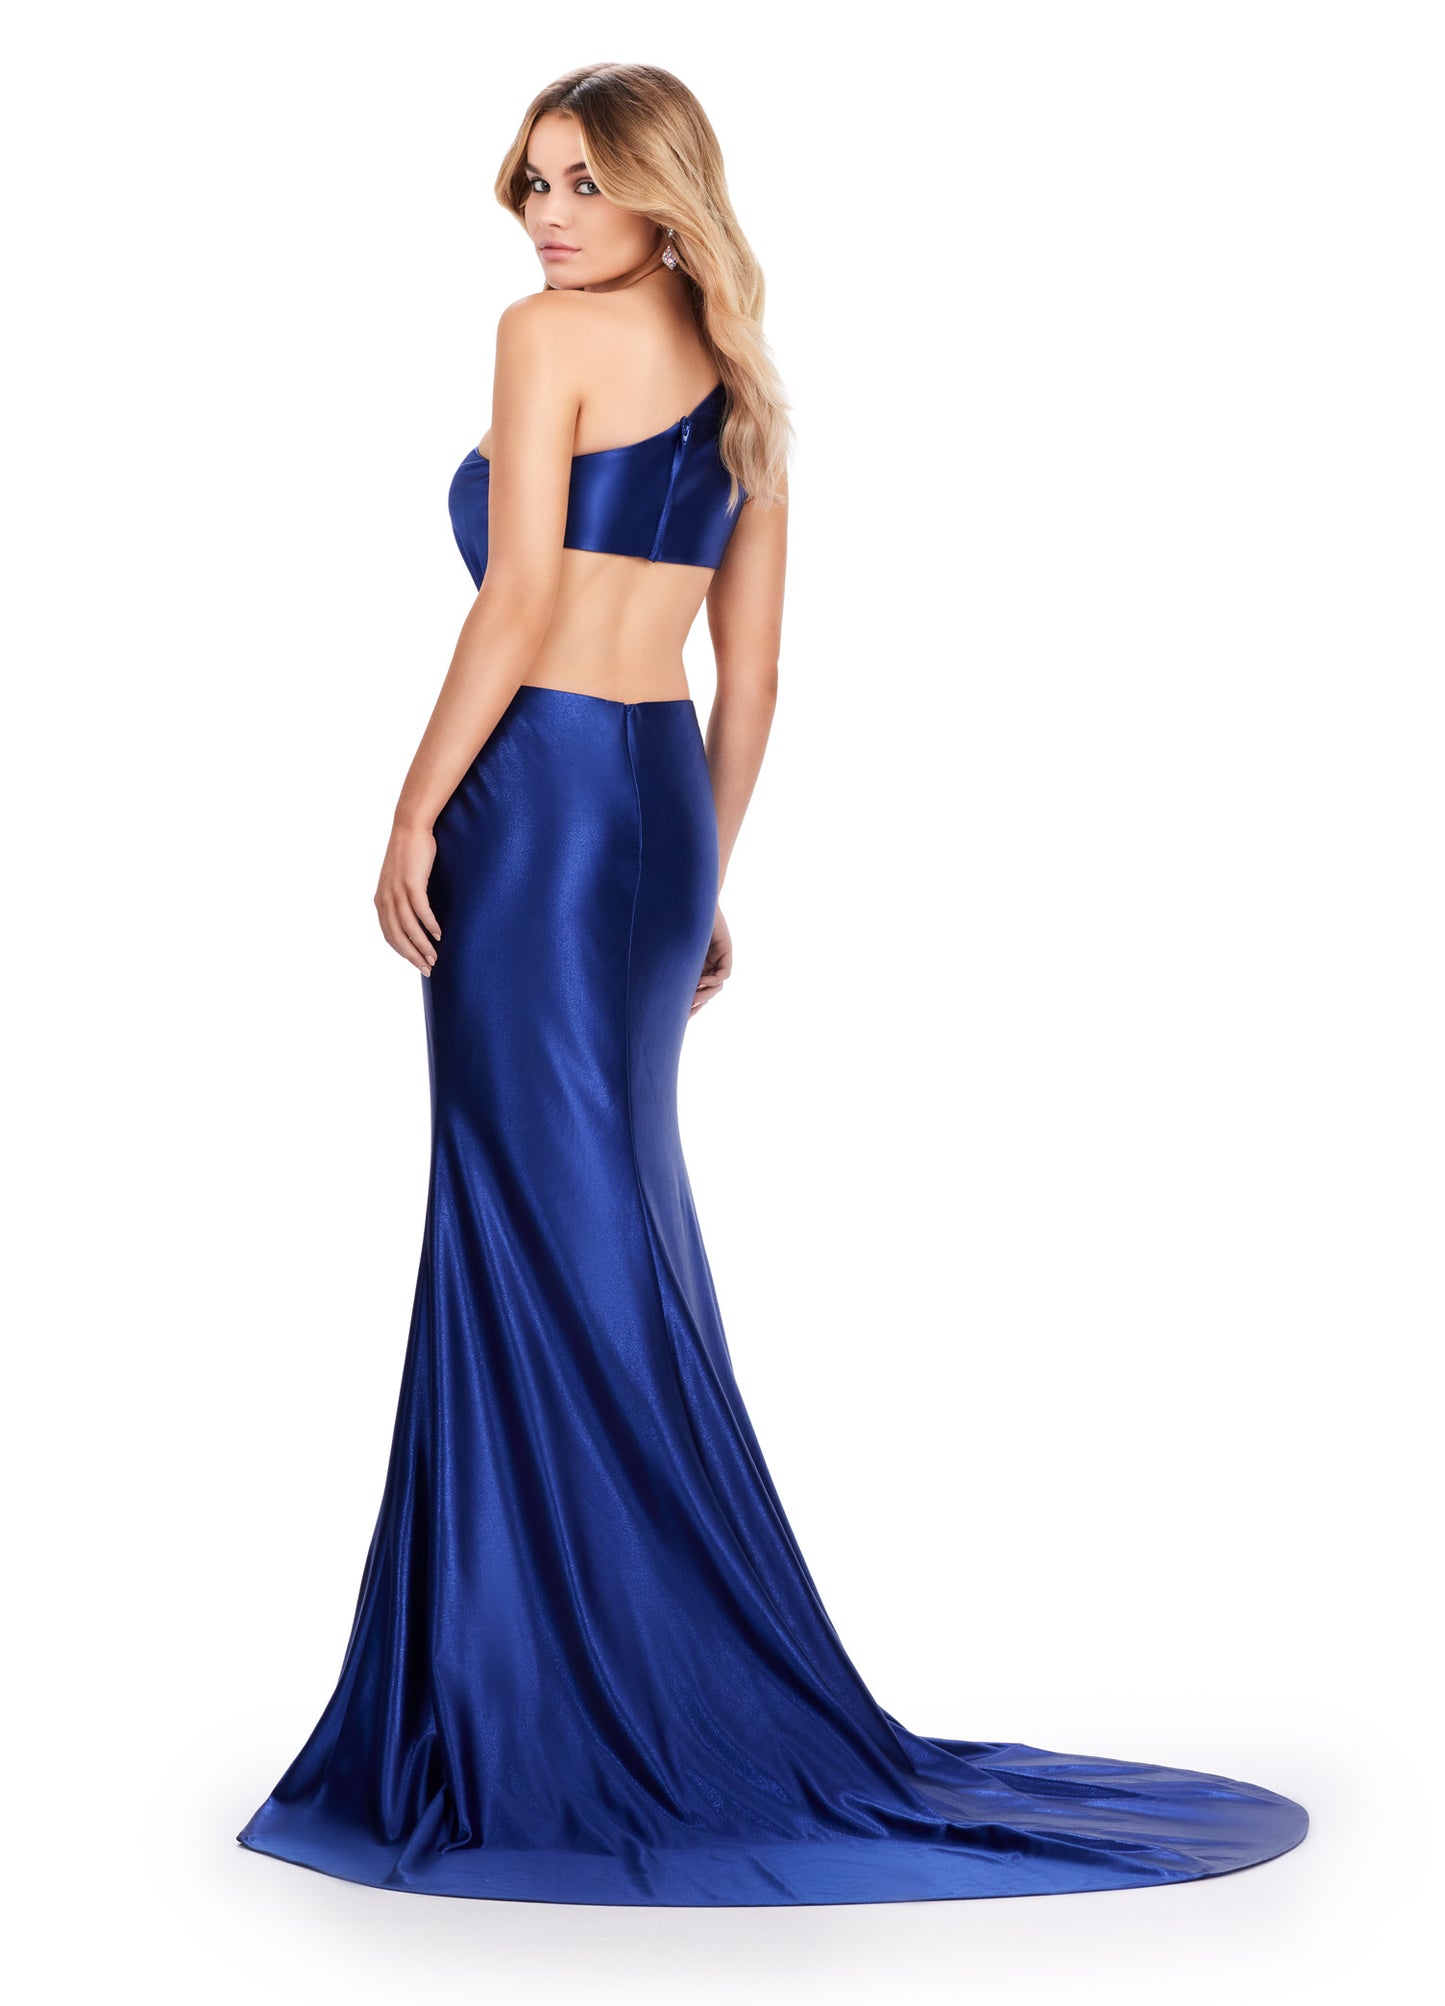 xpertly designed by Ashely Lauren, this elegant 11577 Long Prom Dress features a fitted one shoulder satin gown with stylish cut outs and intricate beading. Perfect for formal events and pageants, it offers a sophisticated and flattering silhouette for any occasion. Elevate your style with this stunning gown. This simplistic, yet elegant one shoulder satin gown features an elegantly draped bodice leading to a side cut out. The look is accented by a beaded brooch.